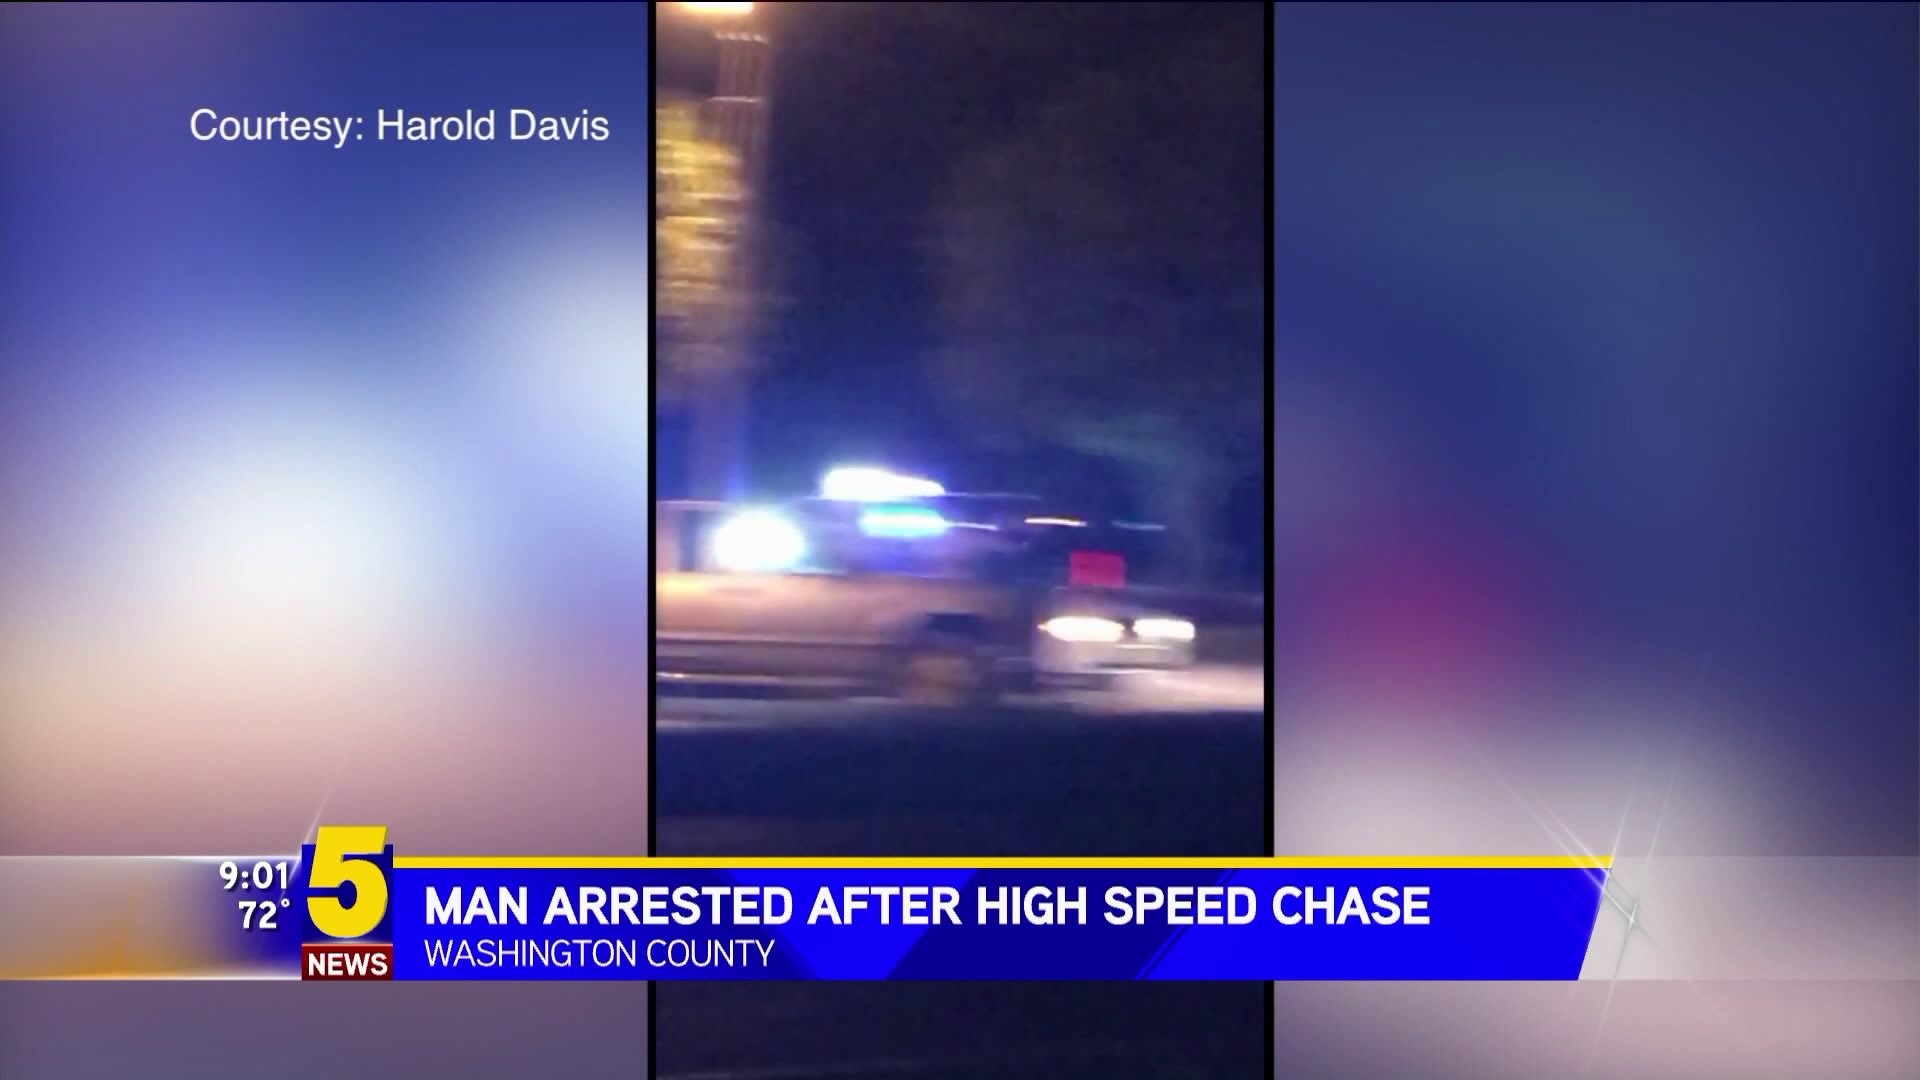 Man Arrested After High Speed Chase